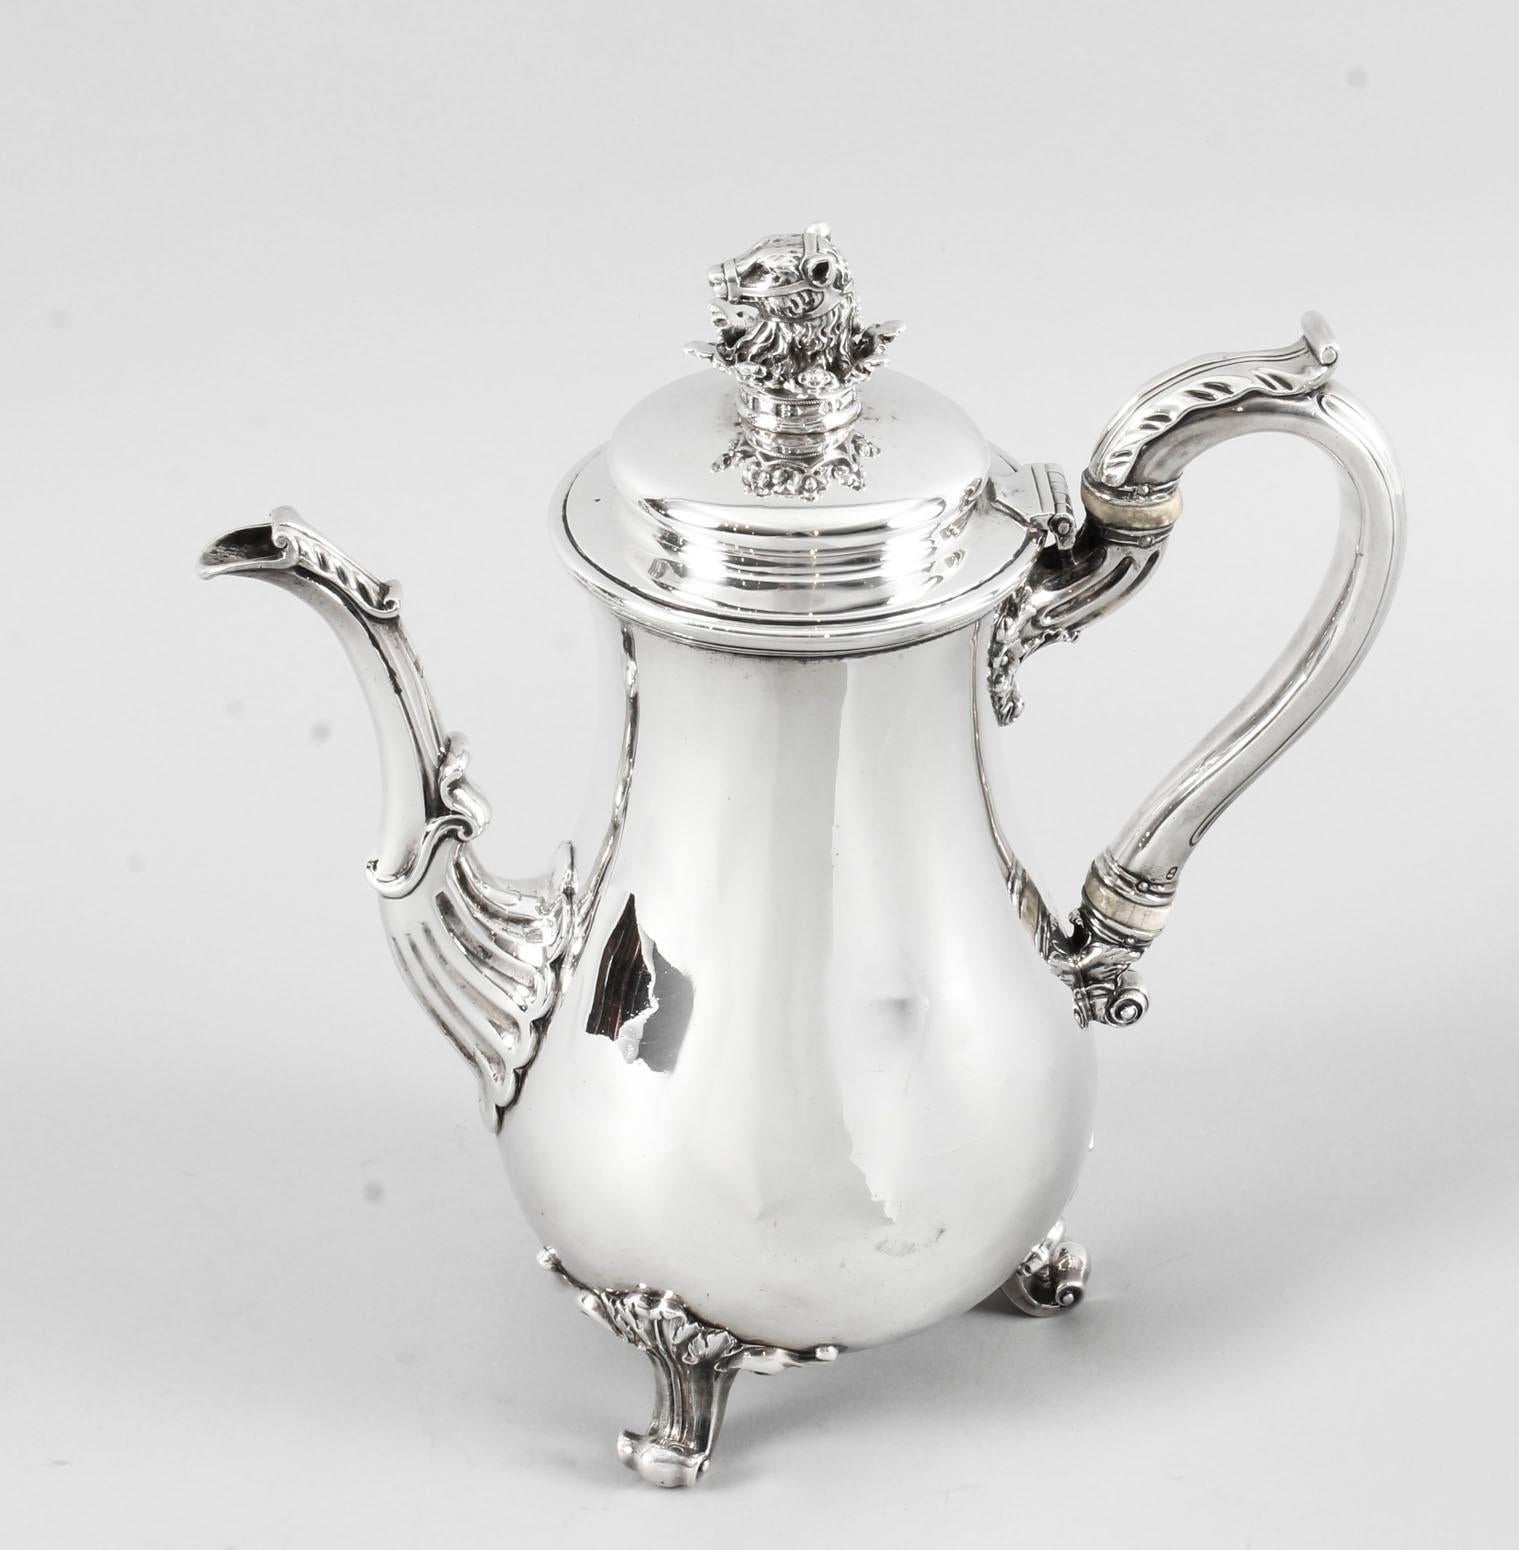 This is a wonderful English antique George IV sterling silver coffee pot by the world famous silversmith Paul Storr.

It has hallmarks for London 1826 and the makers mark of the celebrated silversmith Paul Storr. It bears a wonderful coat of arms